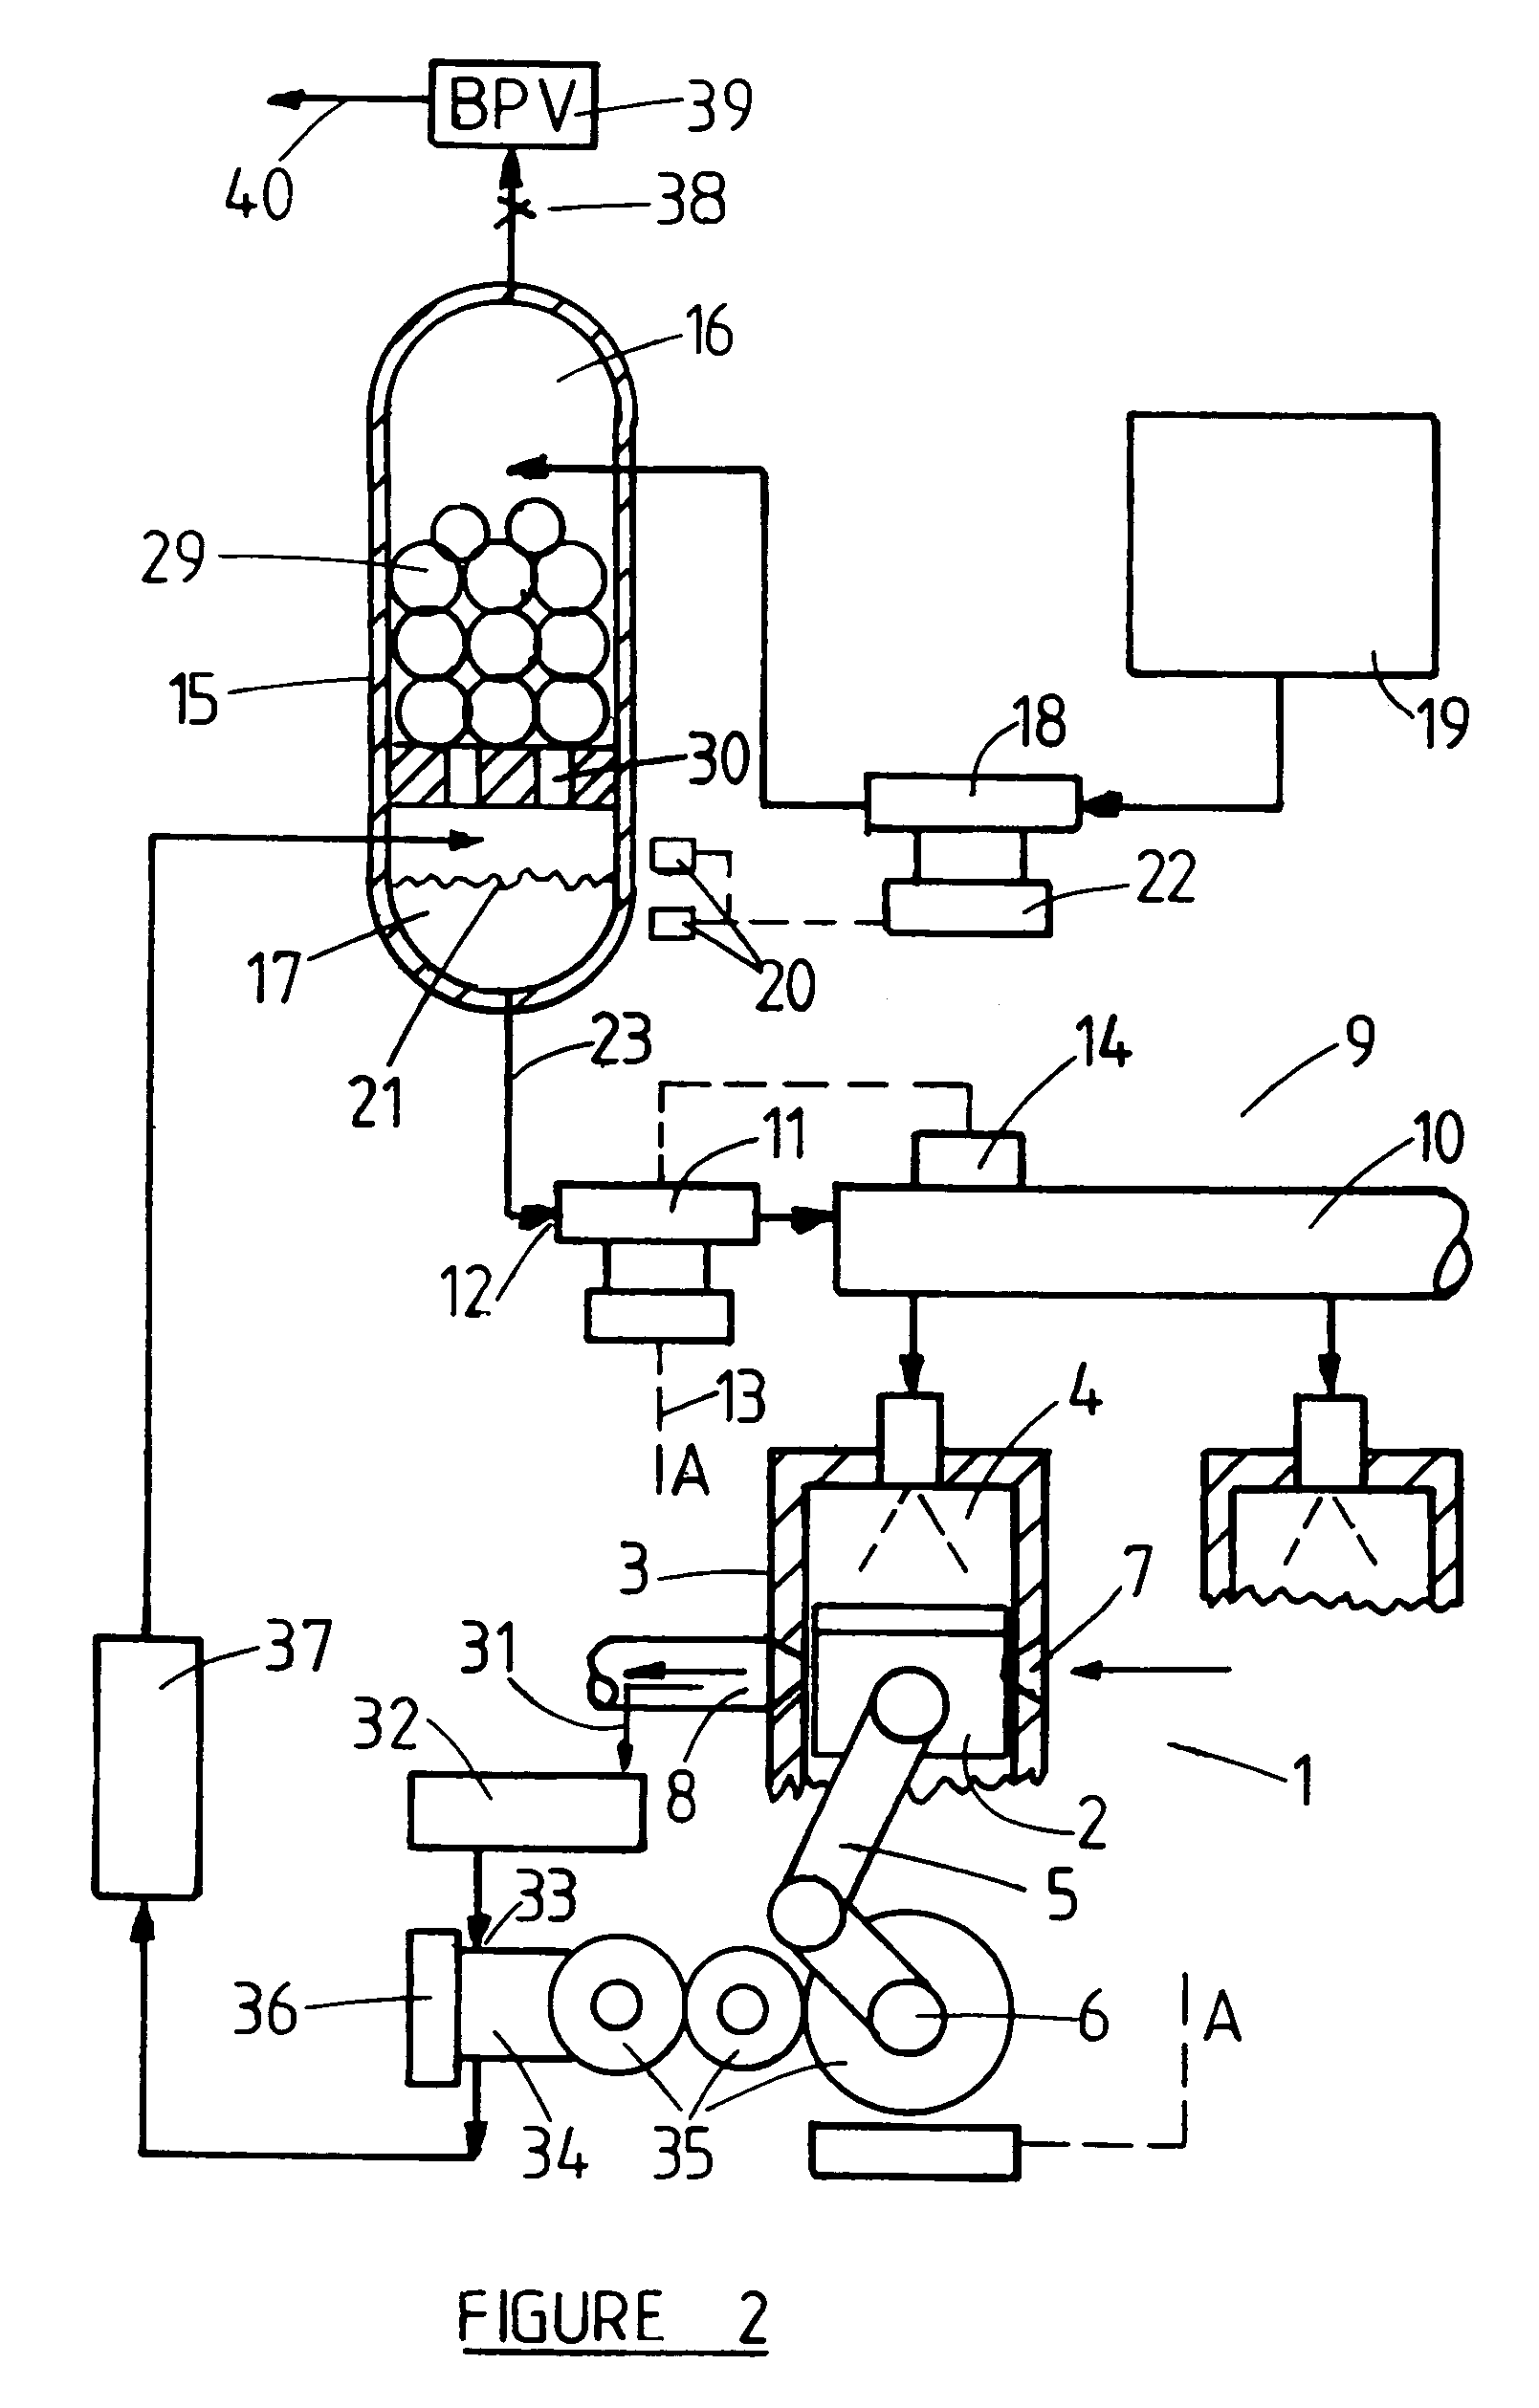 Supplementary slurry fuel atomizer and supply system